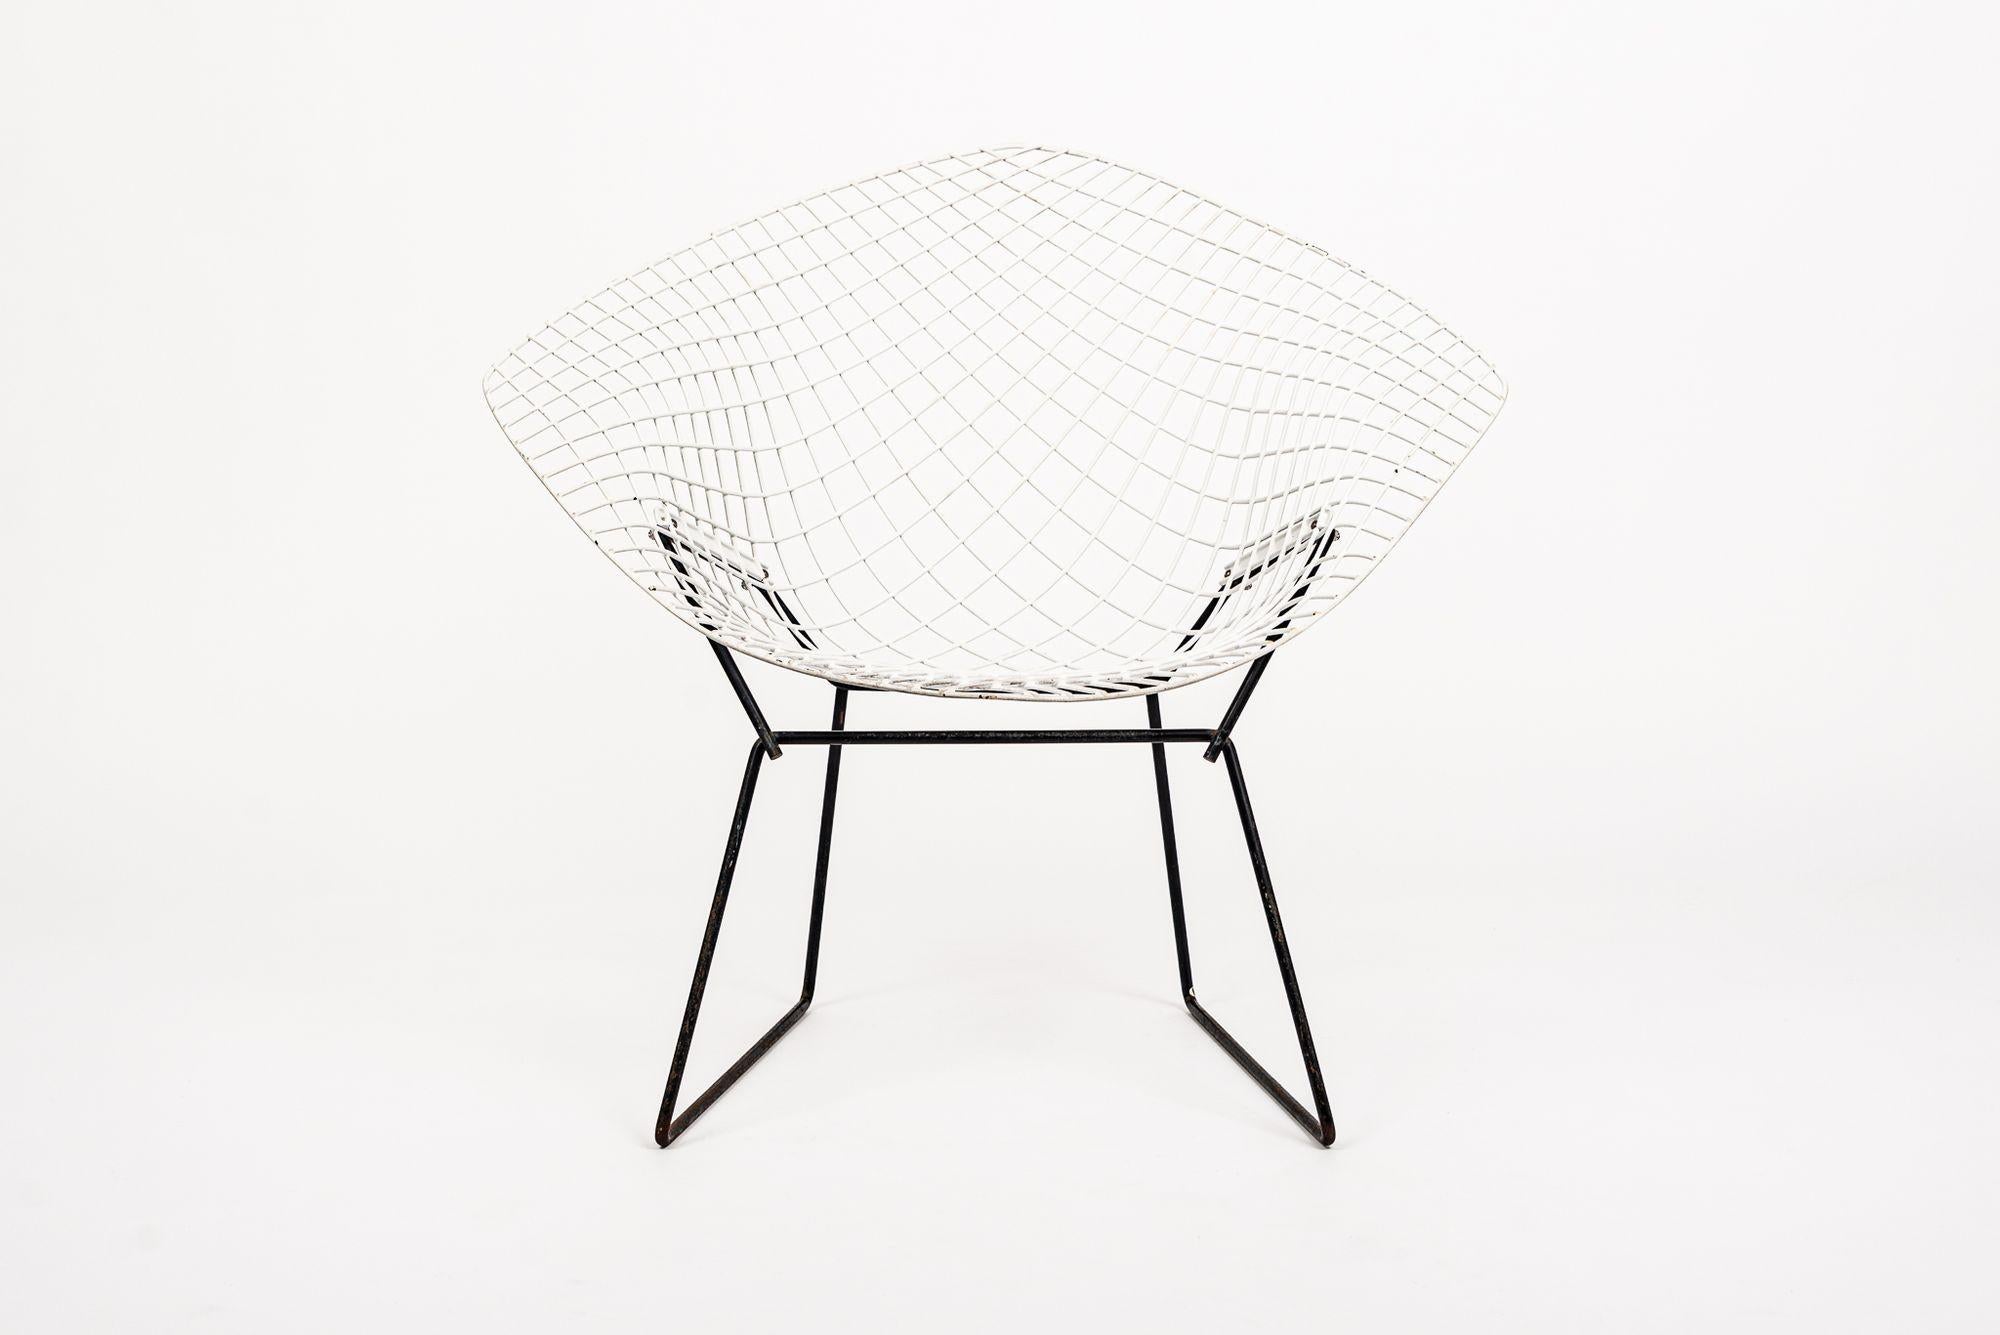 This vintage mid century modern diamond wire lounge chairs designed by Harry Bertoia for Knoll is circa 1970. Originally designed by Bertoia in 1952, the industrial material and sculptural form of this iconic chair has become a fixture of American